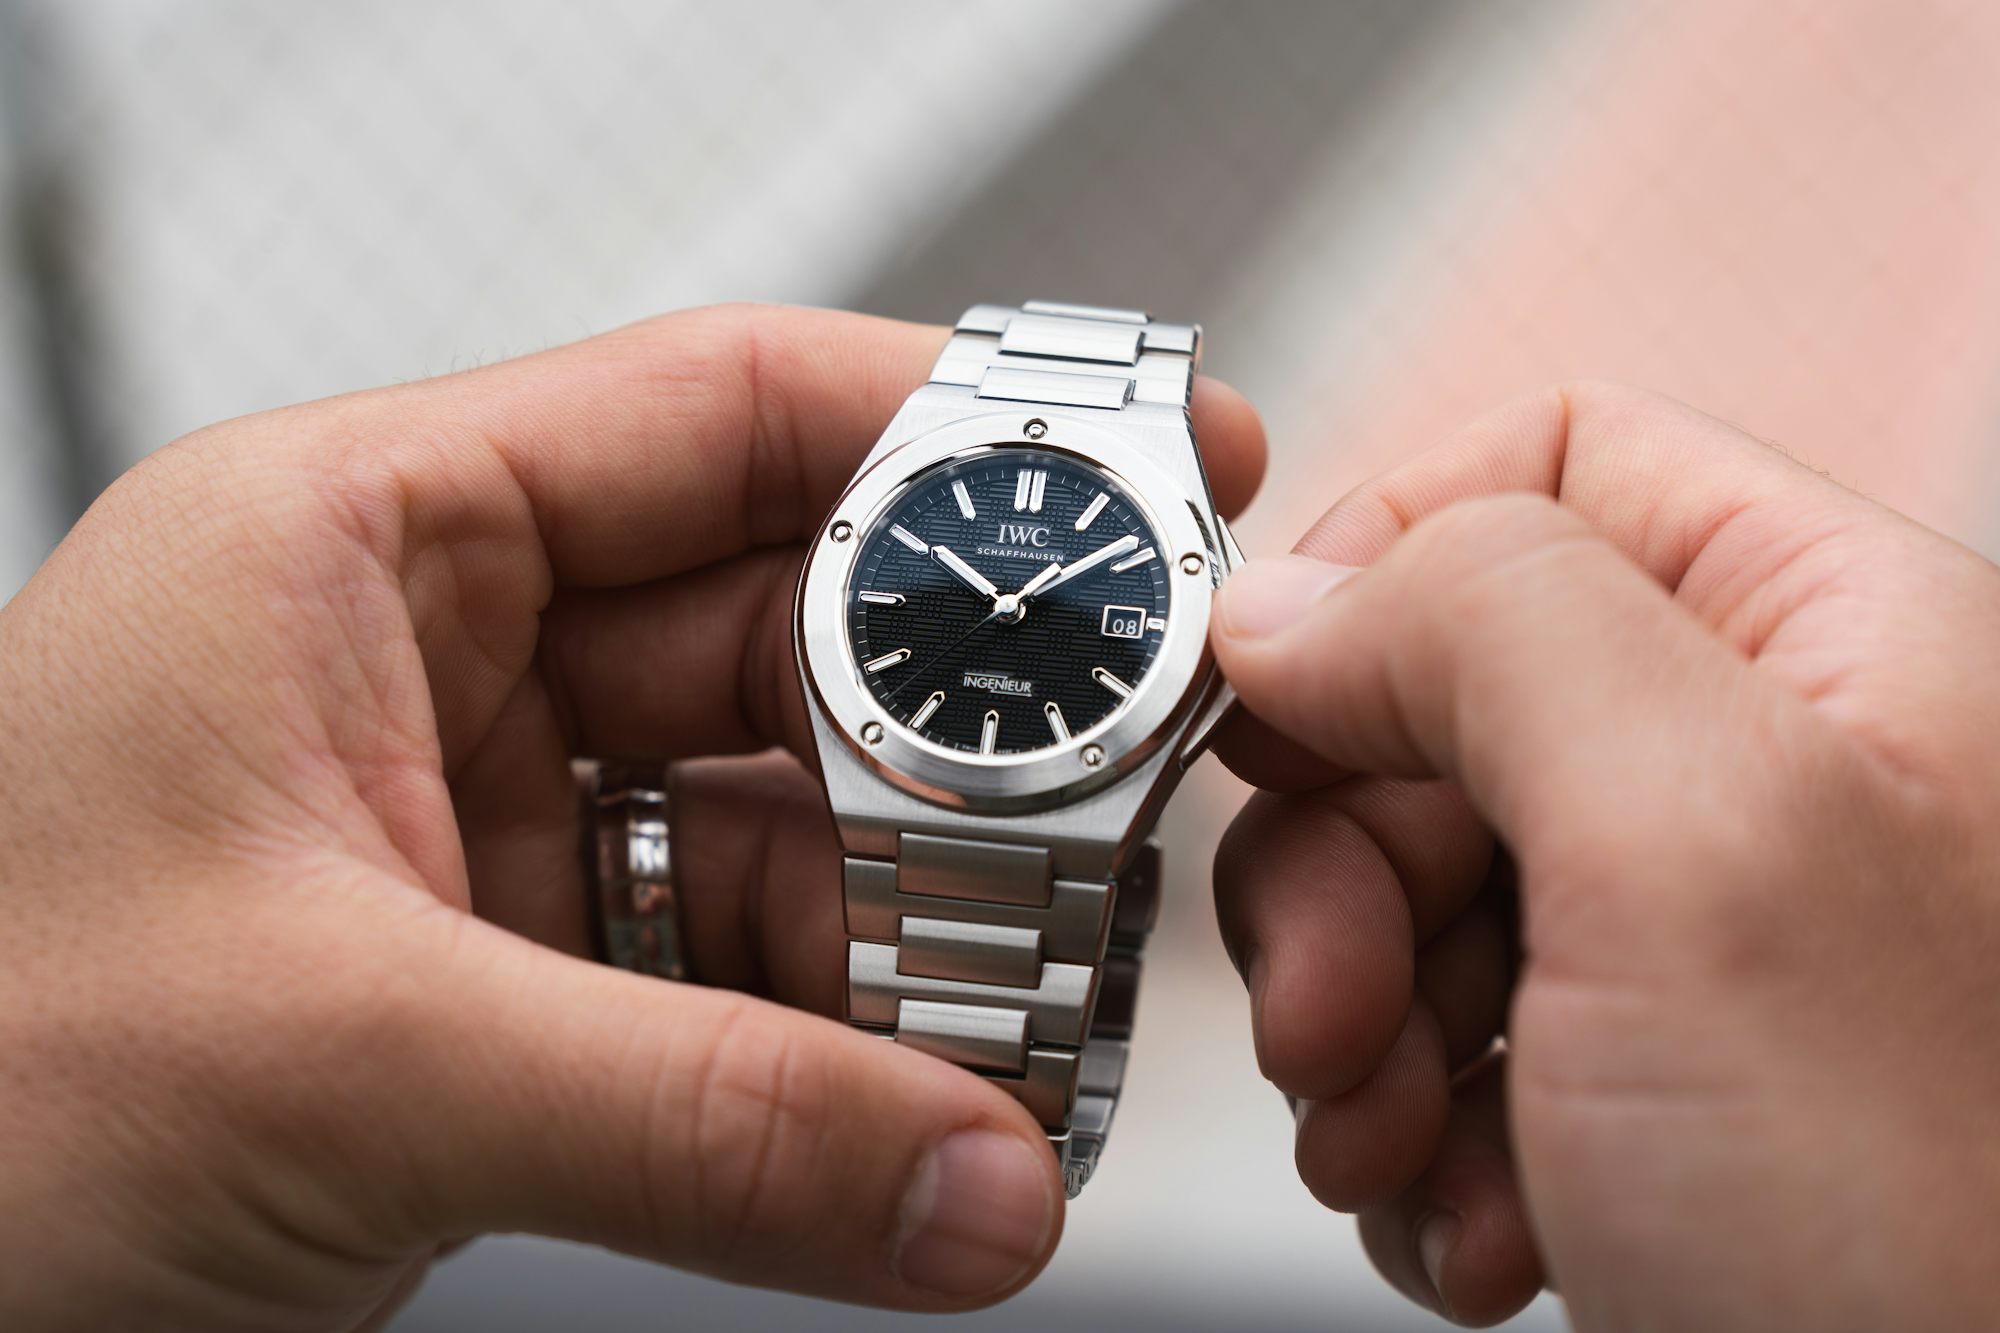 Picture of watch being held 